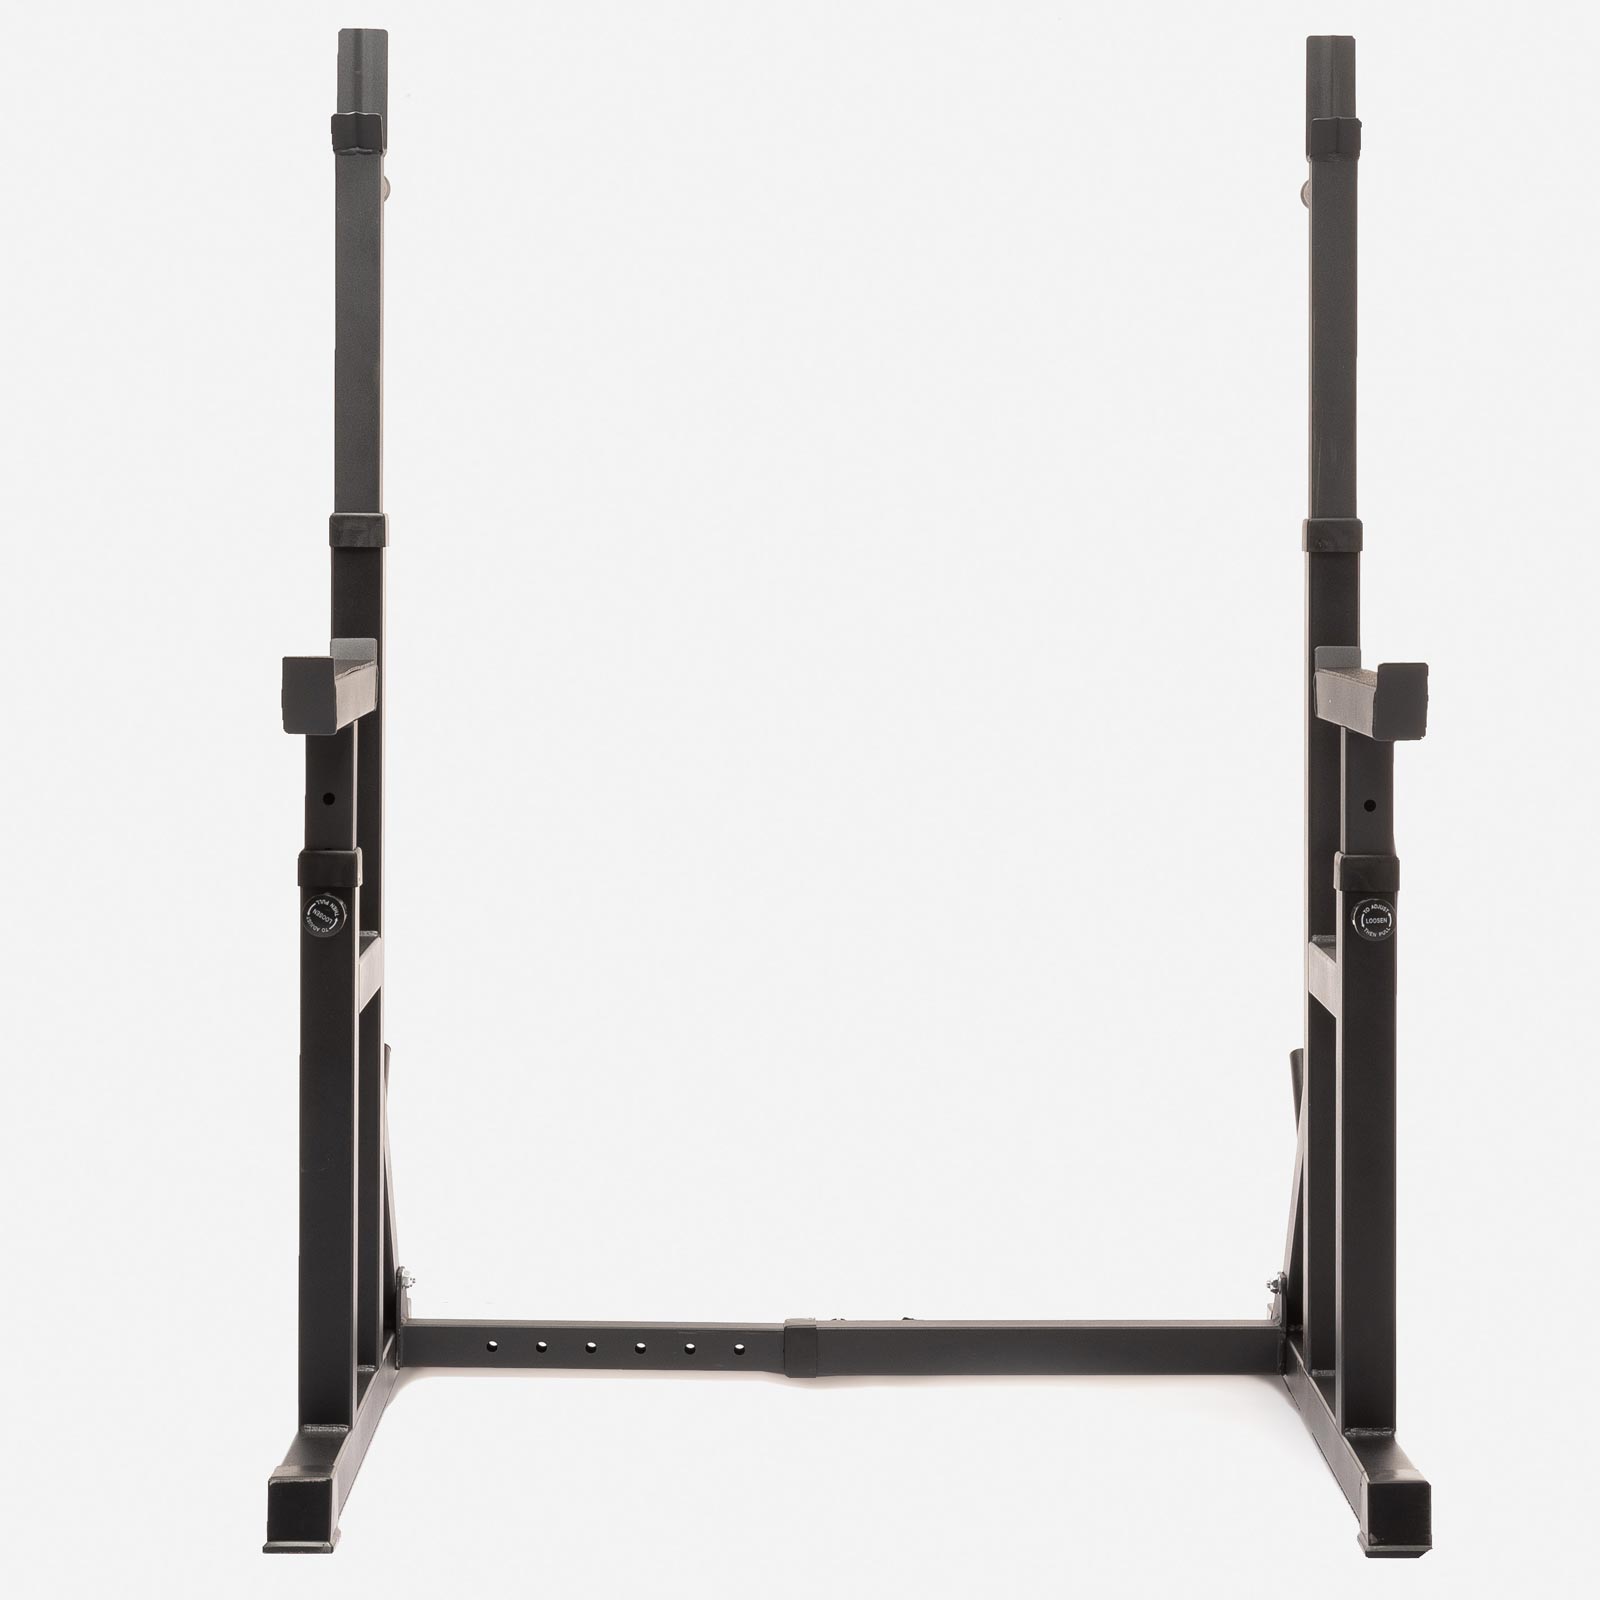 Rival Squat Rack, Weight Racks, Weights, Home Gym Equipment, Fitness, Elverys